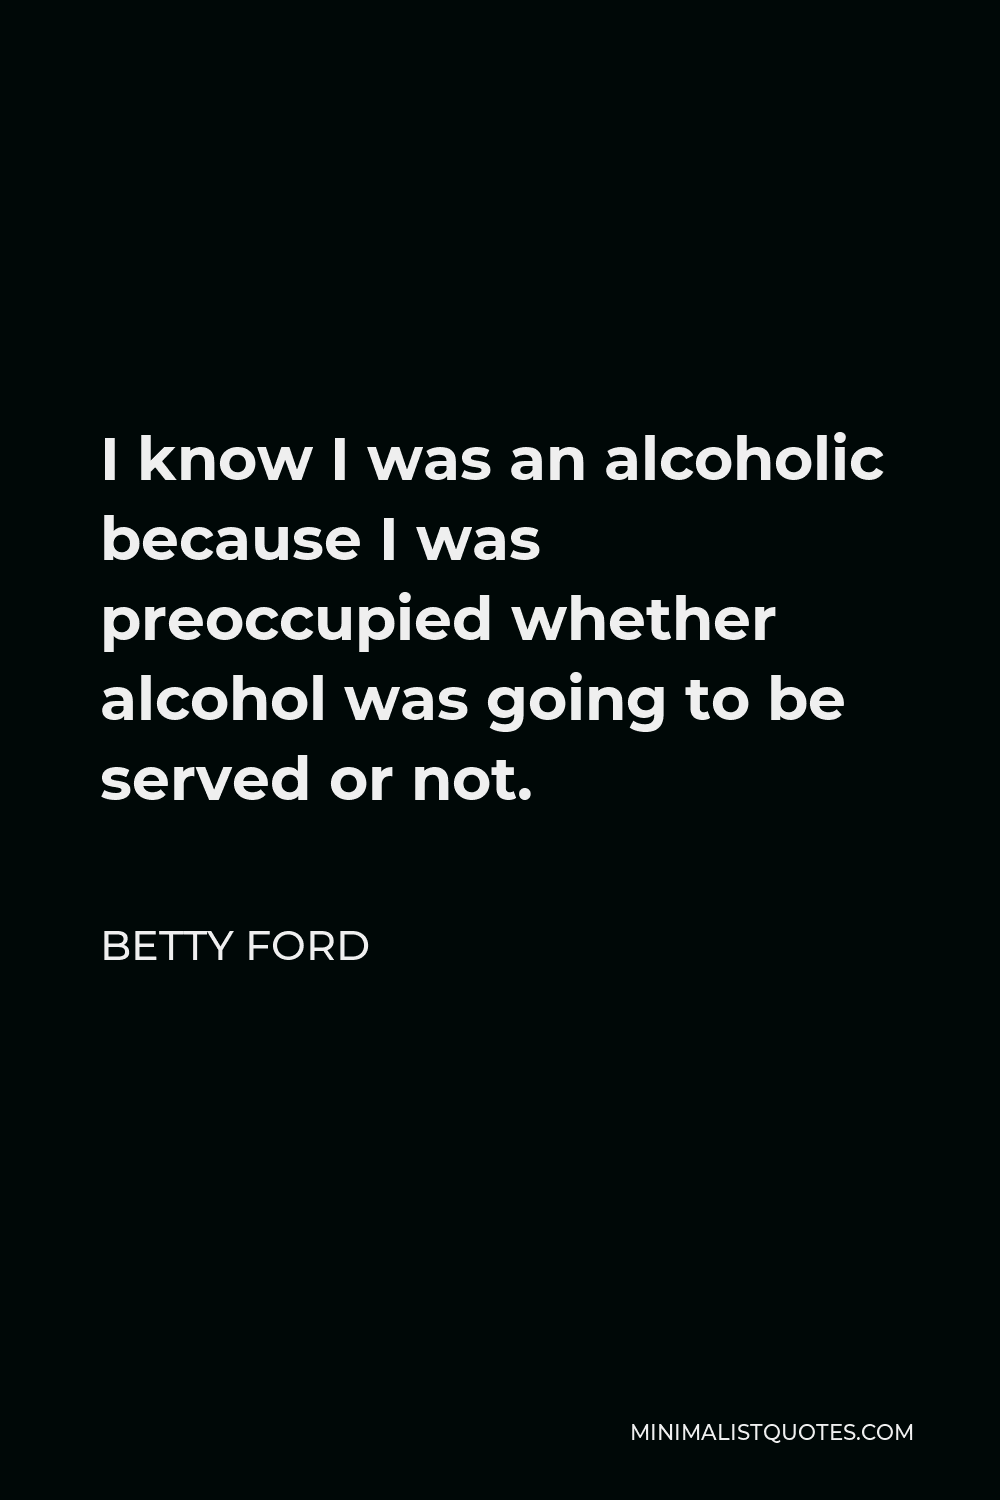 Betty Ford Quote - I know I was an alcoholic because I was preoccupied whether alcohol was going to be served or not.